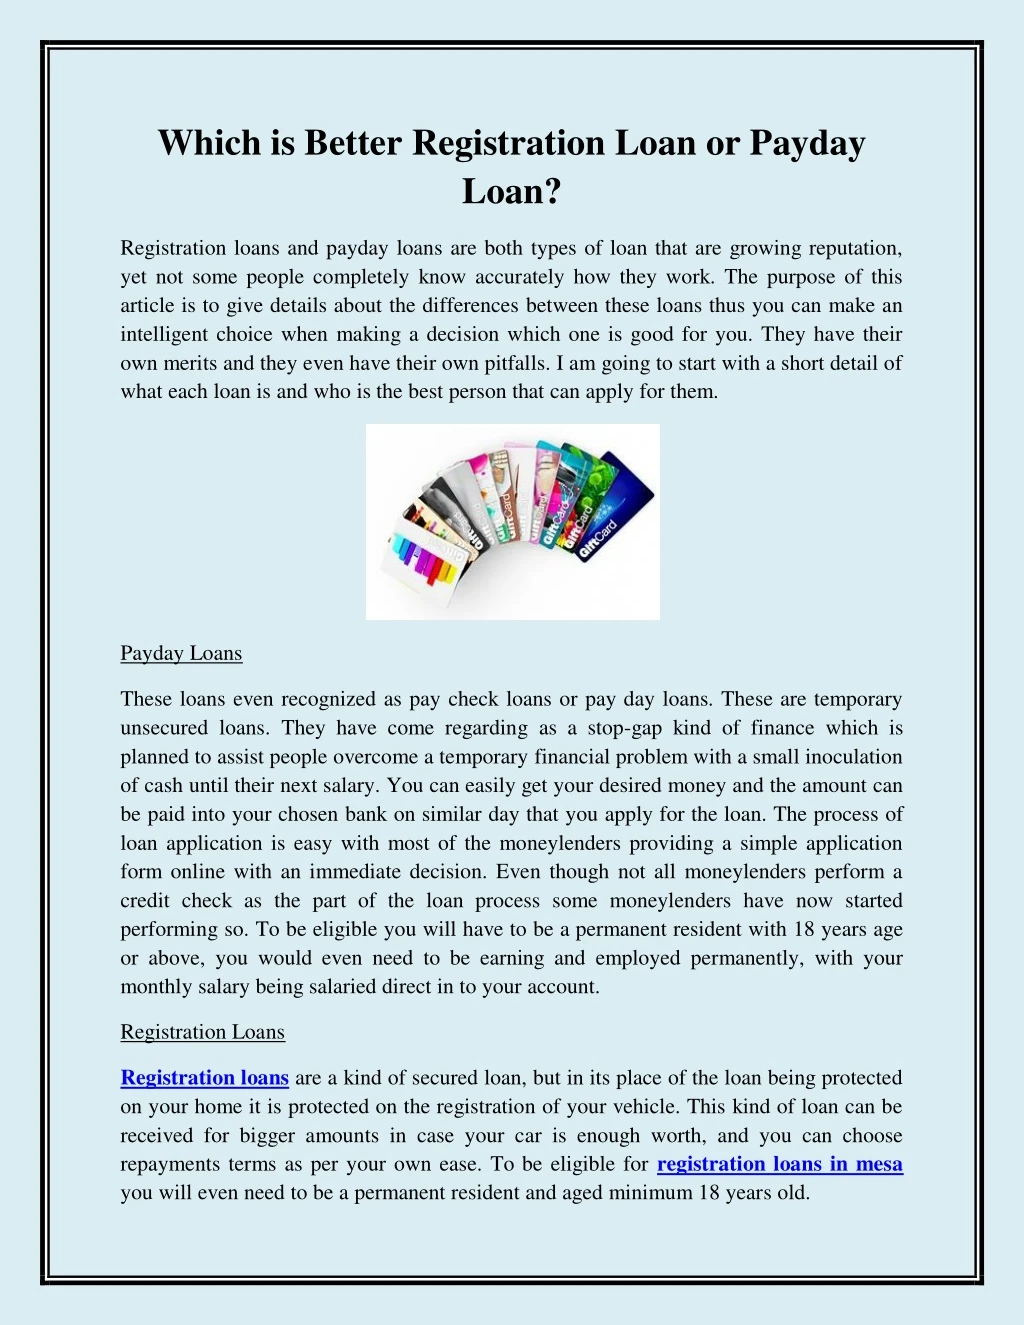 which is better registration loan or payday loan